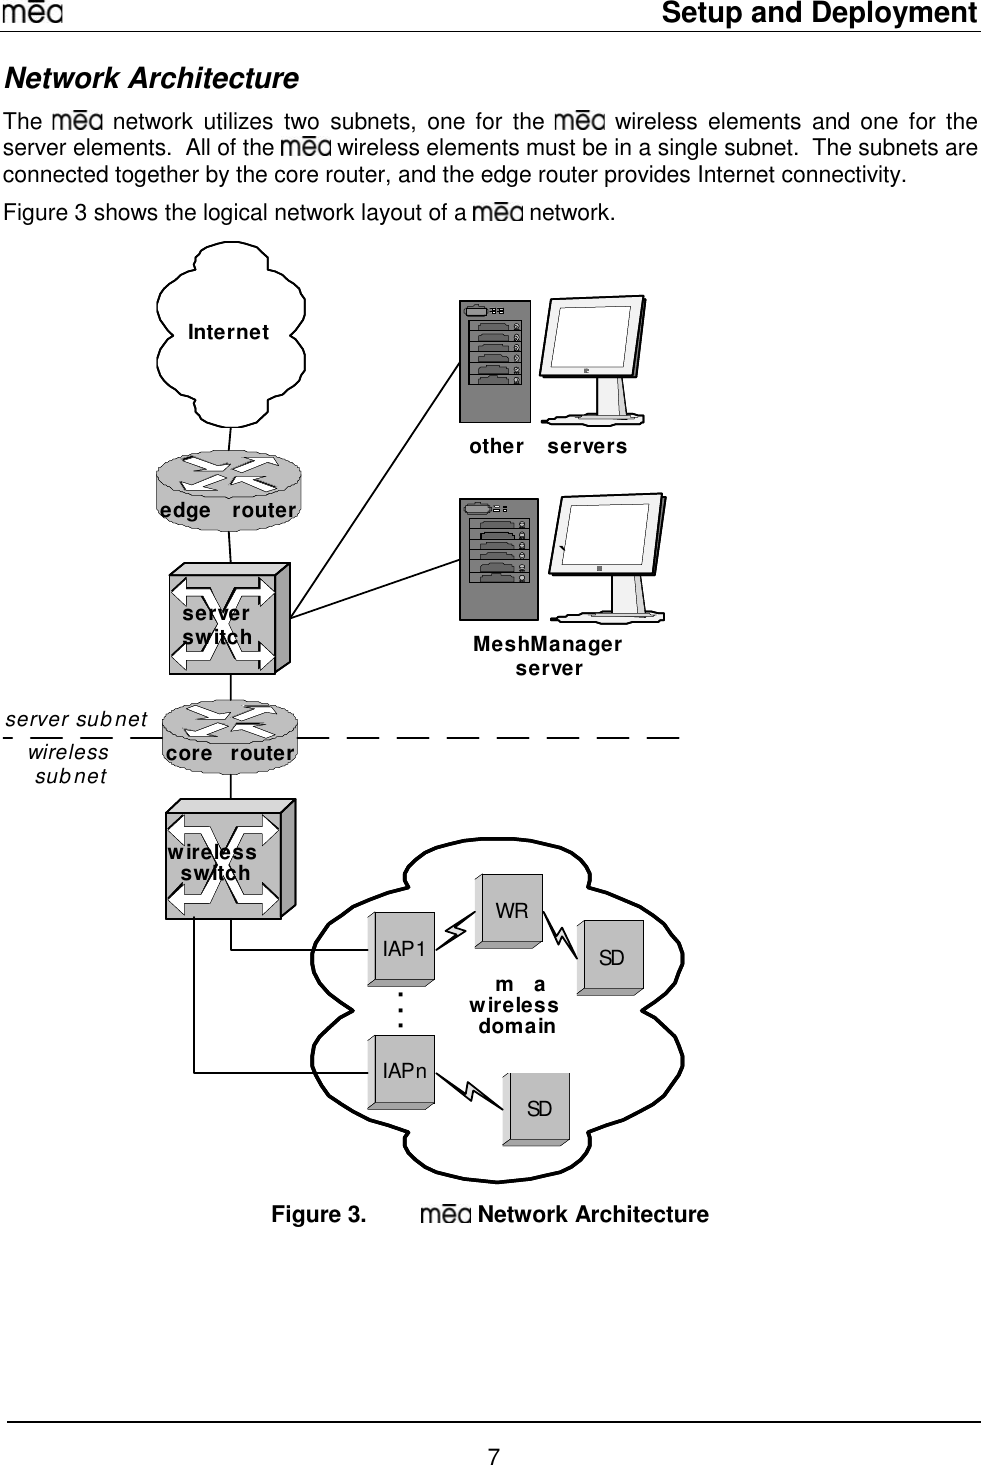     Setup and Deployment  7 Network Architecture The   network utilizes two subnets, one for the   wireless elements and one for the server elements.  All of the   wireless elements must be in a single subnet.  The subnets are connected together by the core router, and the edge router provides Internet connectivity. Figure 3 shows the logical network layout of a   network.   core routeredge routerInternetserverswitchwirelessswitchMeshManagerserver`other serversmawirelessdomainIAP1IAPn. . .WRSDSDserver subnetwirelesssubnet Figure 3.   Network Architecture 